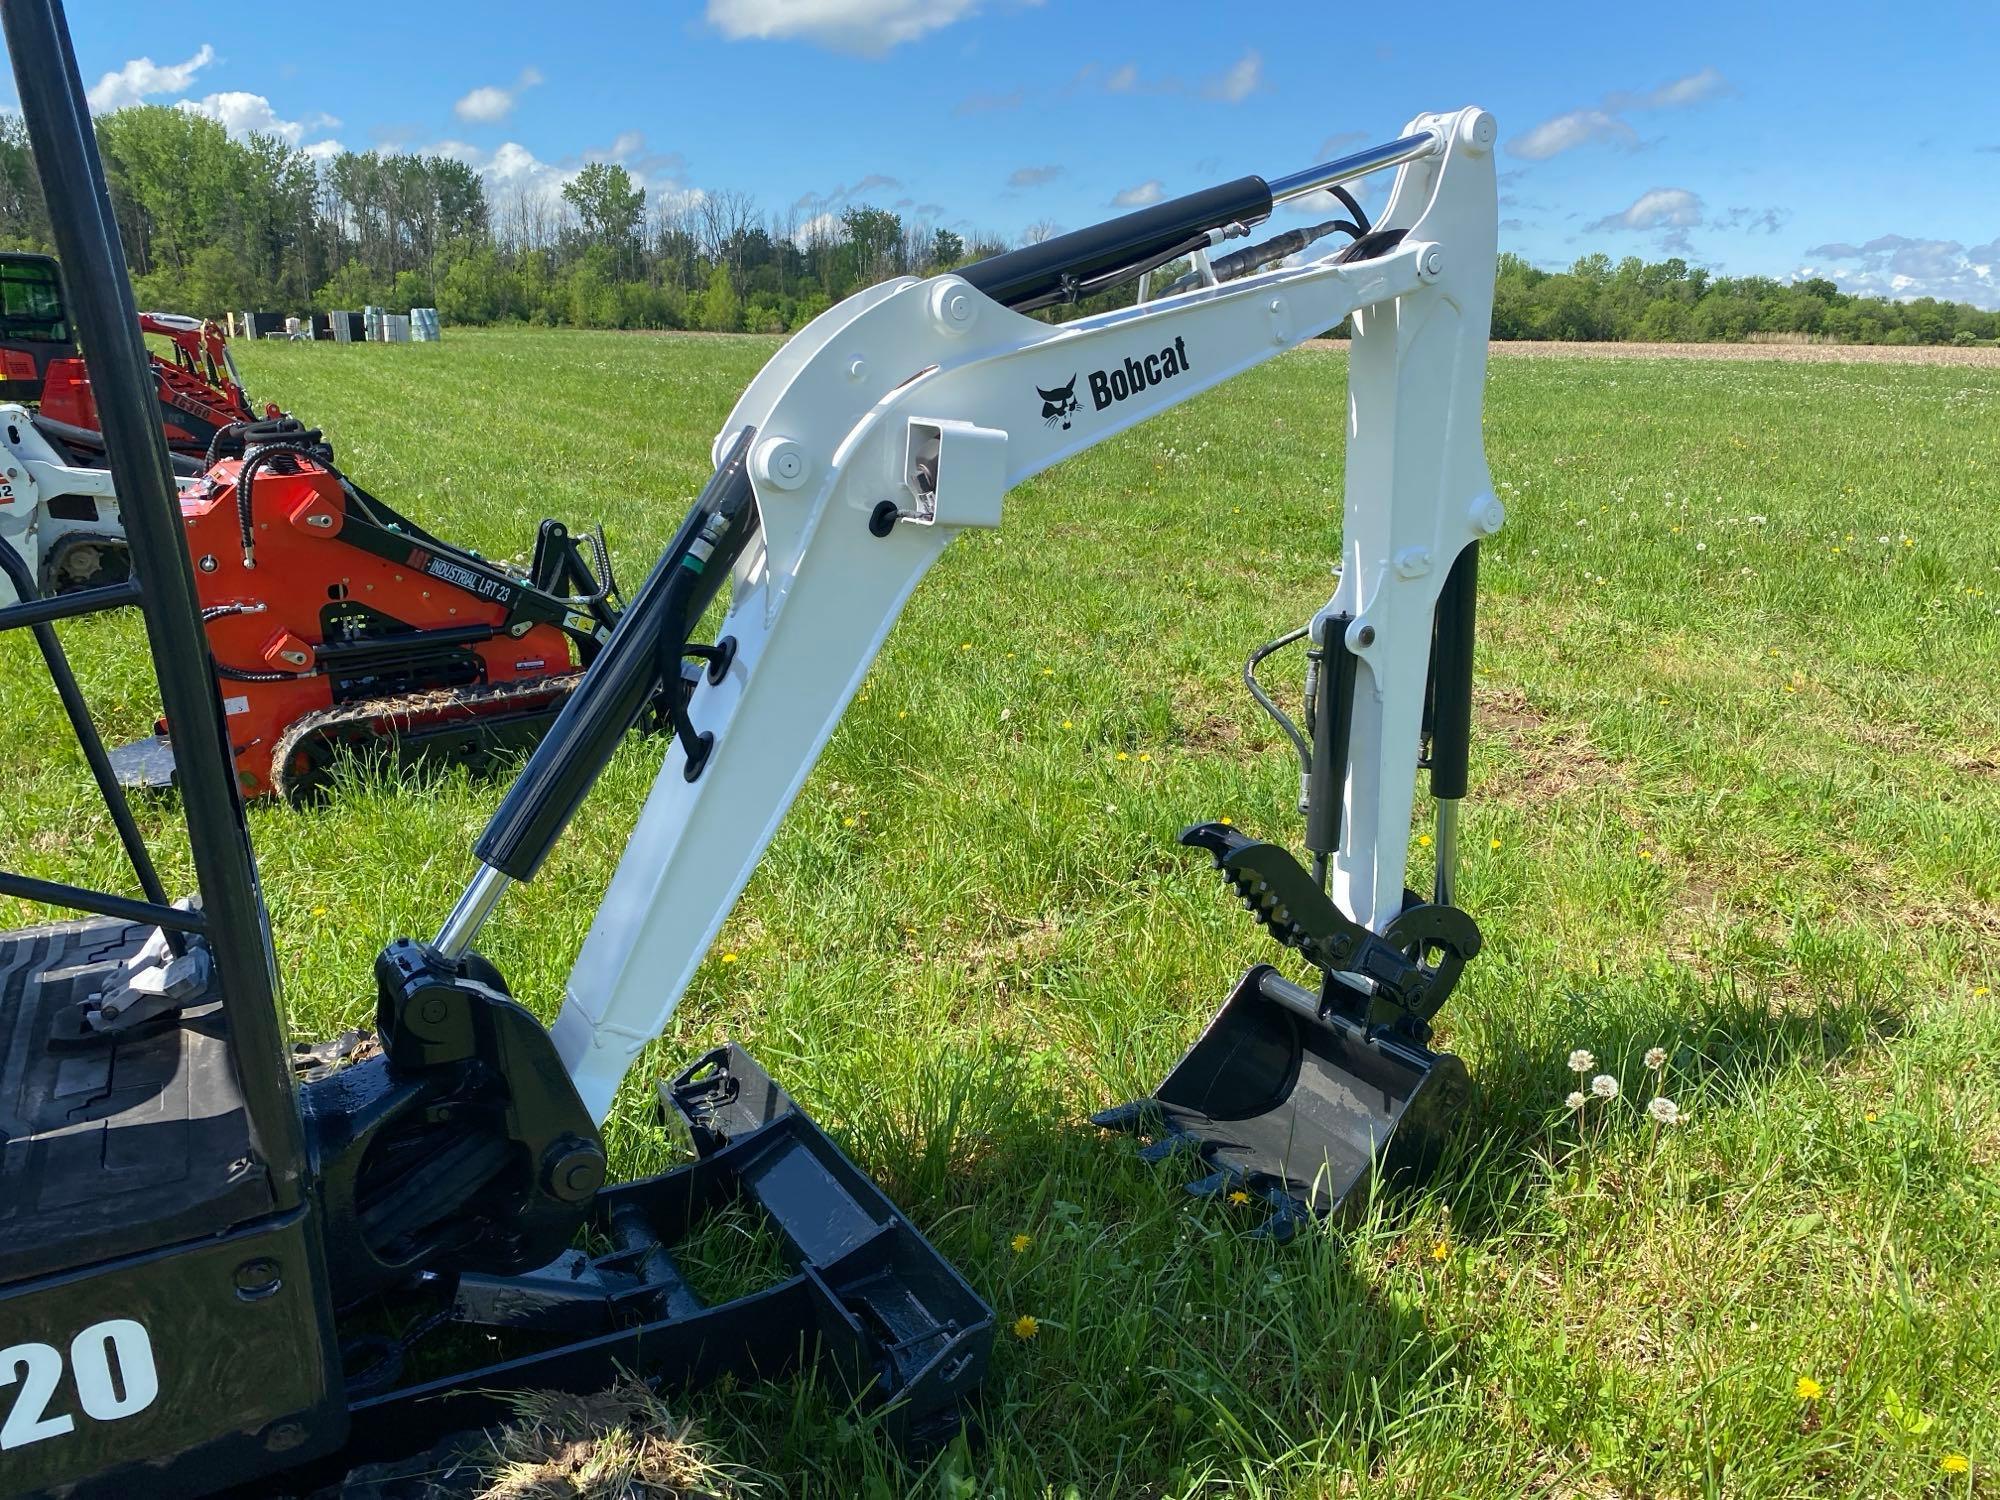 2020 BOBCAT E20 HYDRAULIC EXCAVATOR SN:B3BL18158 powered by diesel engine, equipped with OROPS,